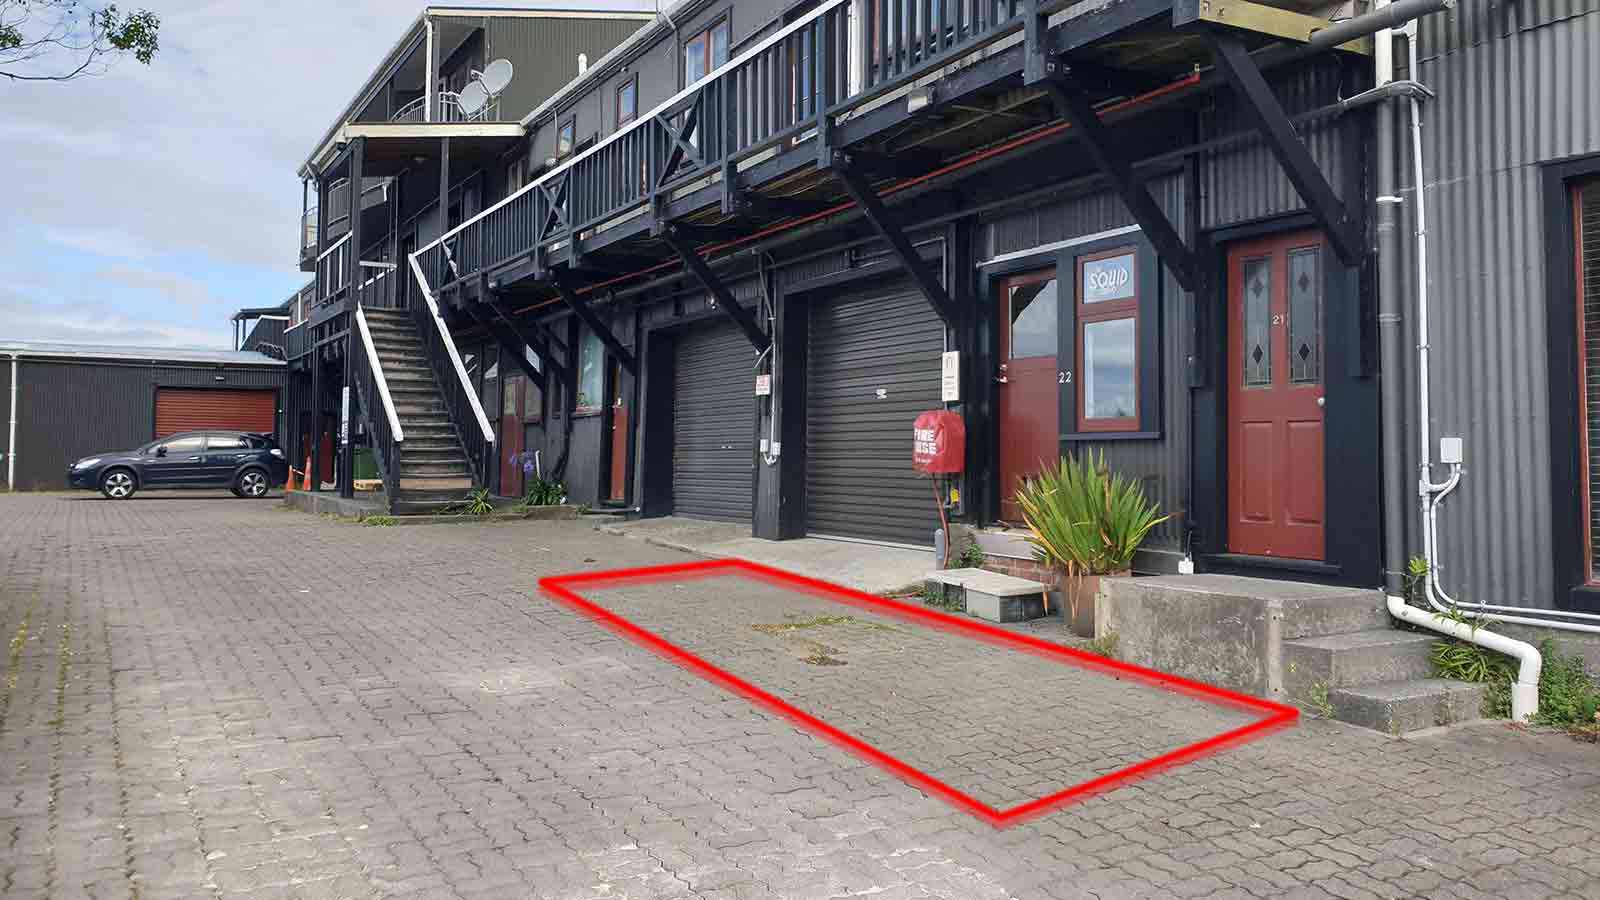 Red square showing location of carpark available for squid parking outside of a garage door.